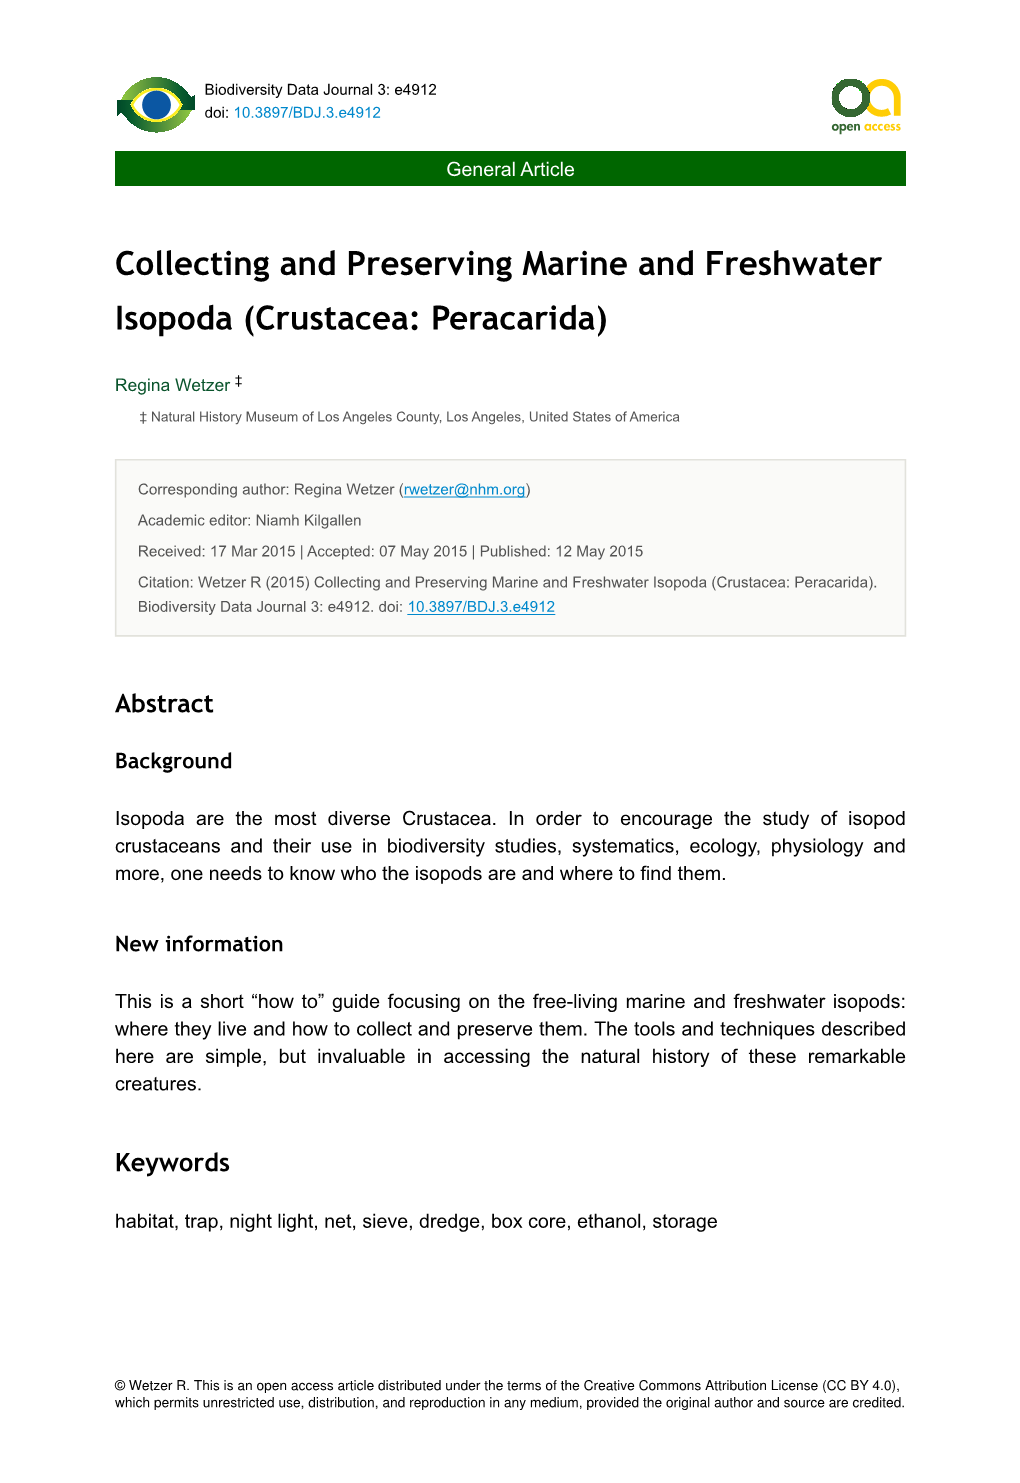 Collecting and Preserving Marine and Freshwater Isopoda (Crustacea: Peracarida)